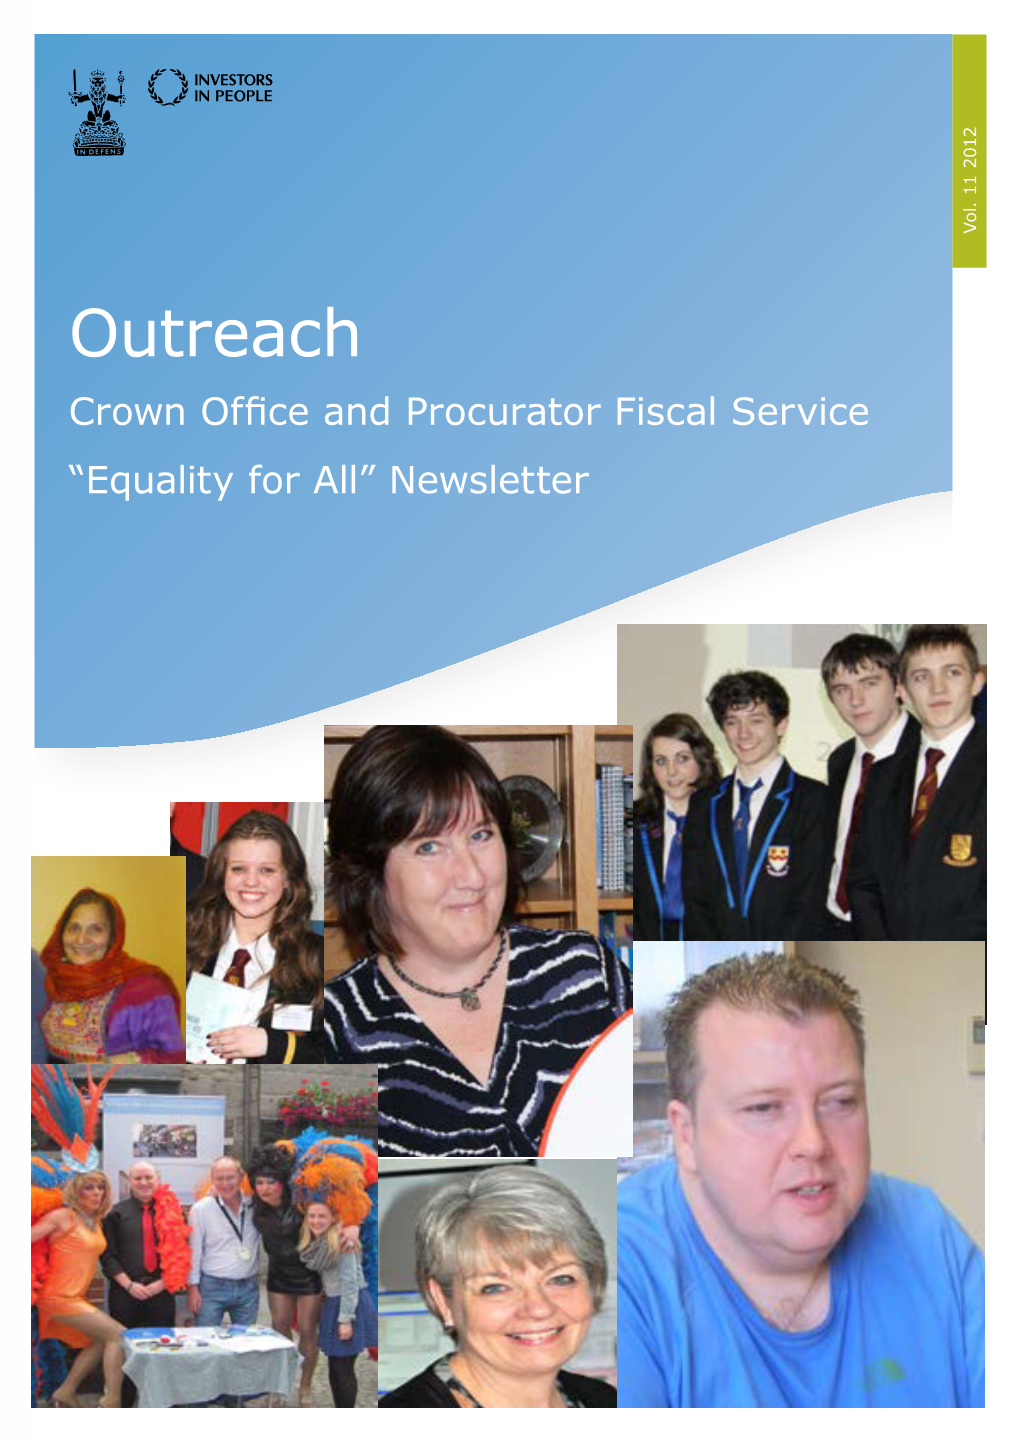 Outreach Crown Office and Procurator Fiscal Service “Equality for All” Newsletter Outreach Outreach